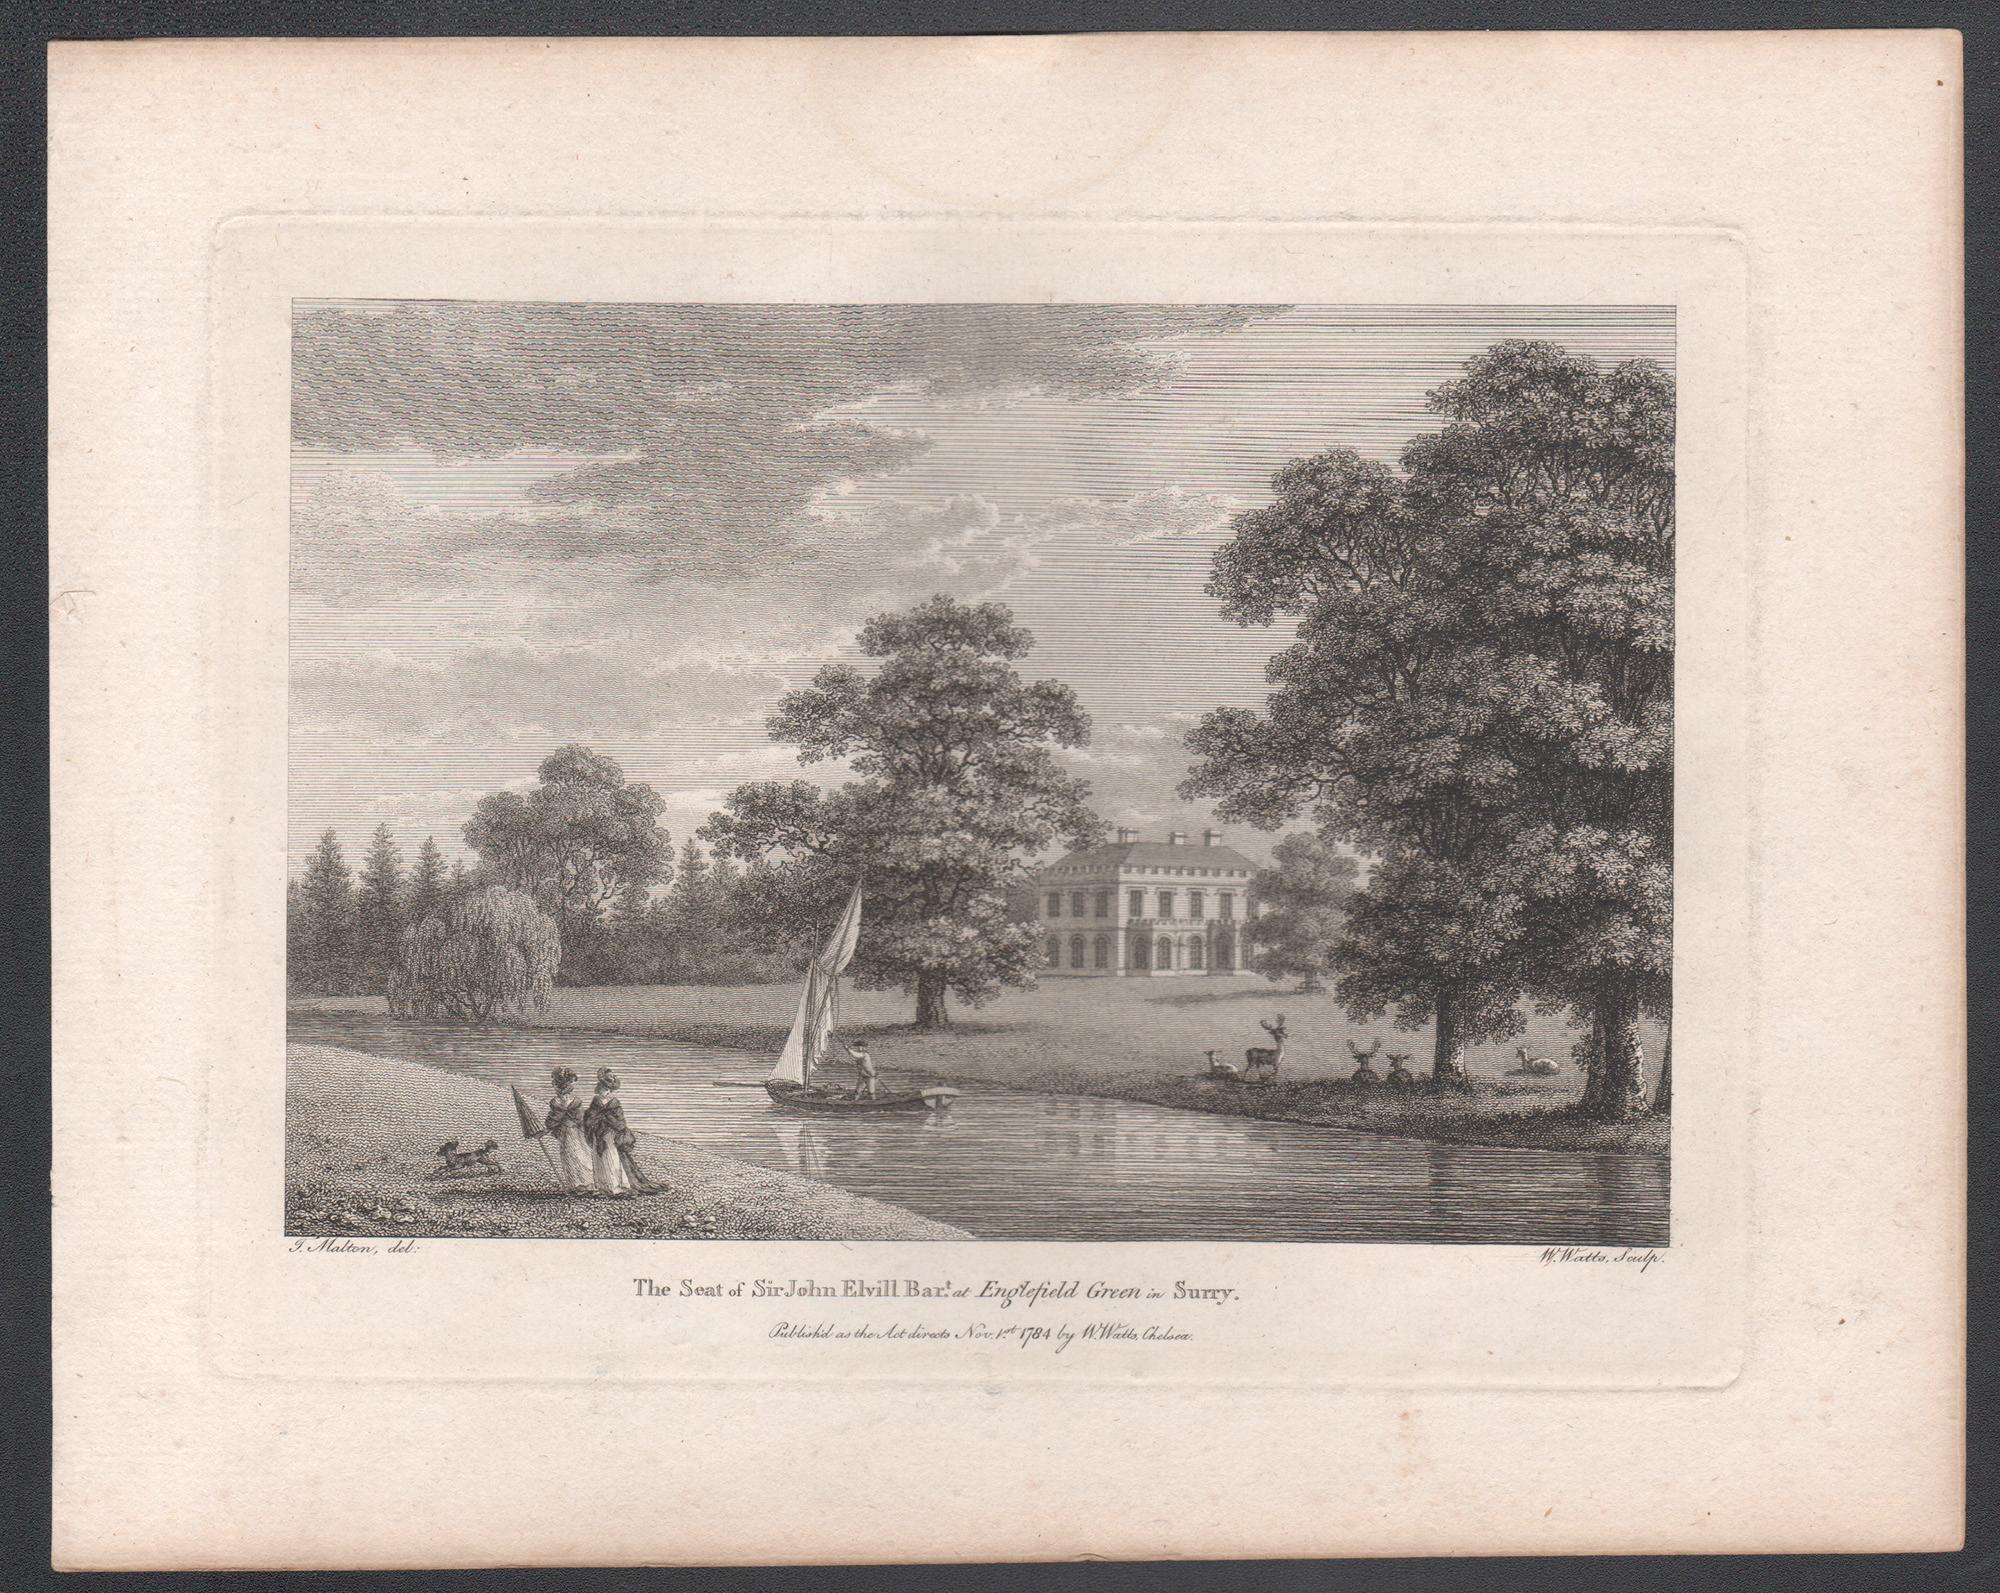 Englefield Green, Surrey, 18th century English country house engraving, 1784 - Print by William Watts